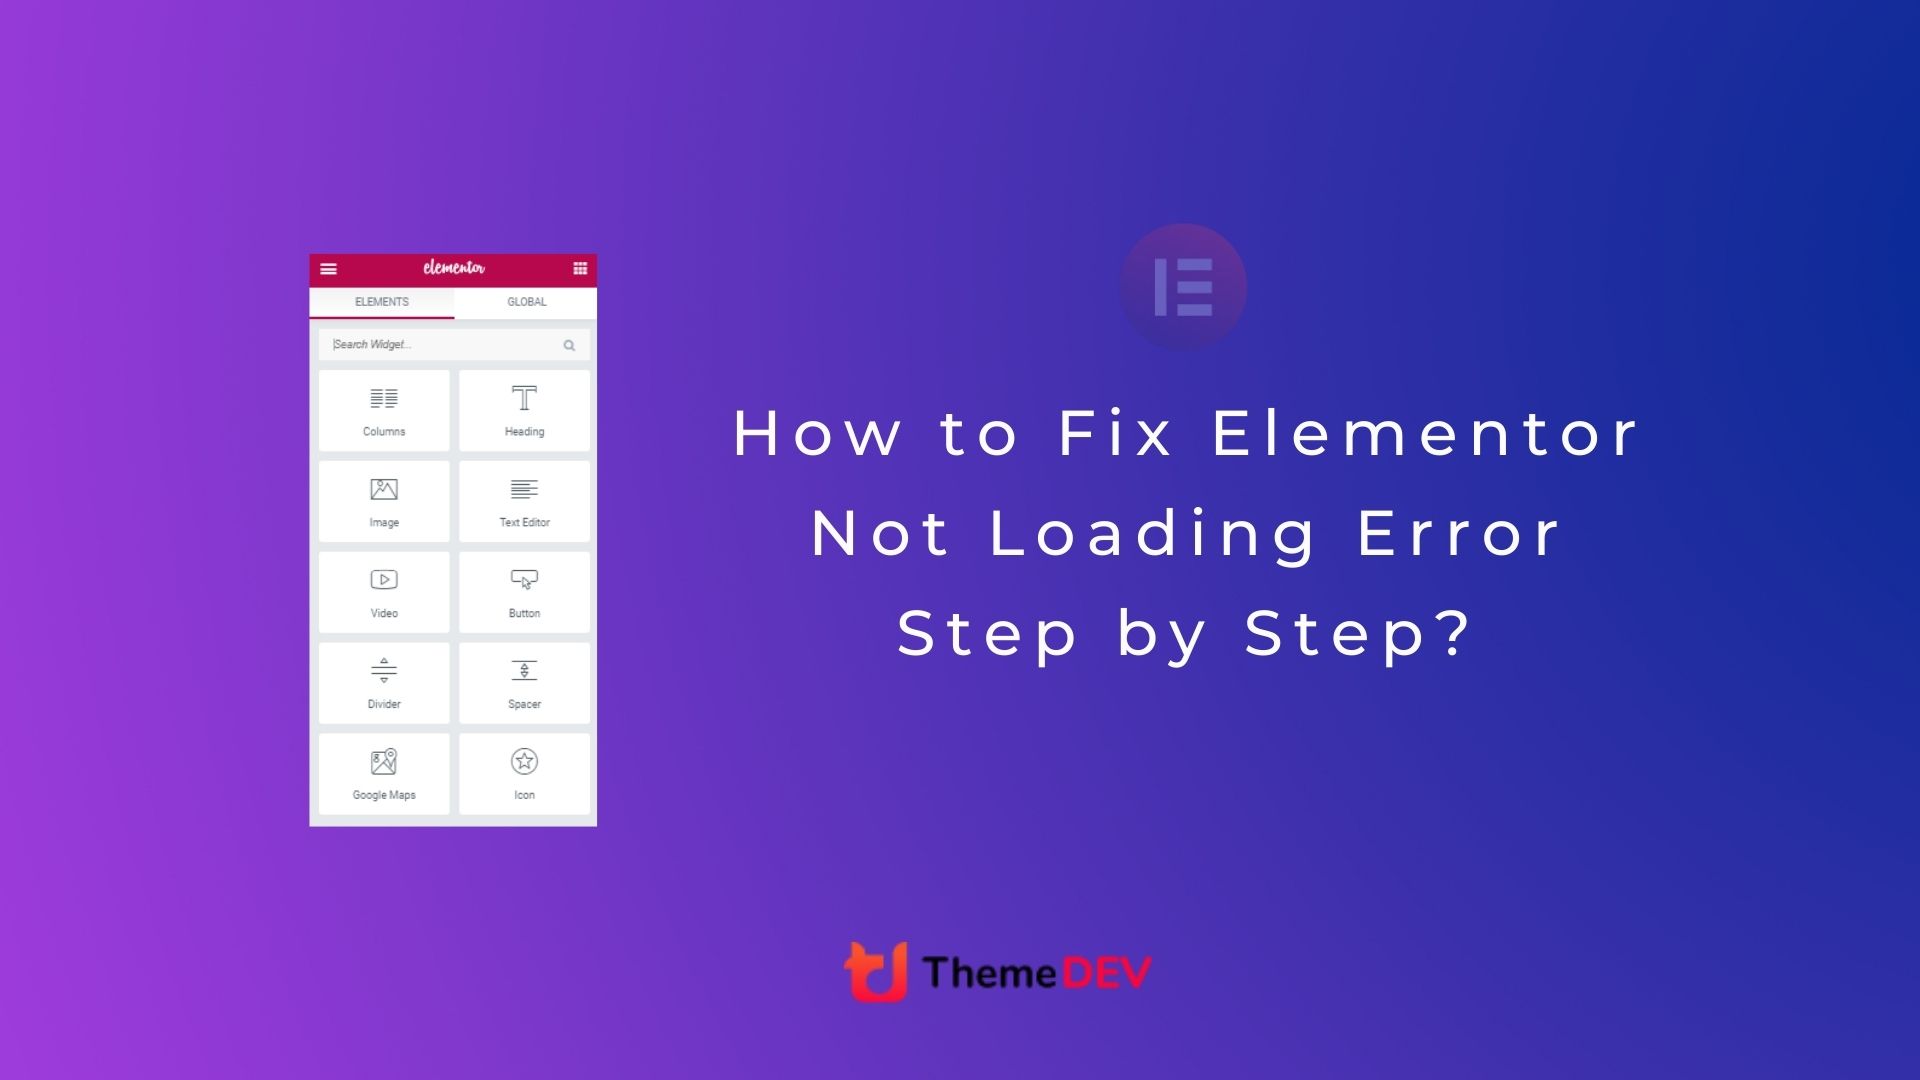 How to Fix Elementor Not Loading Error Step by Step?